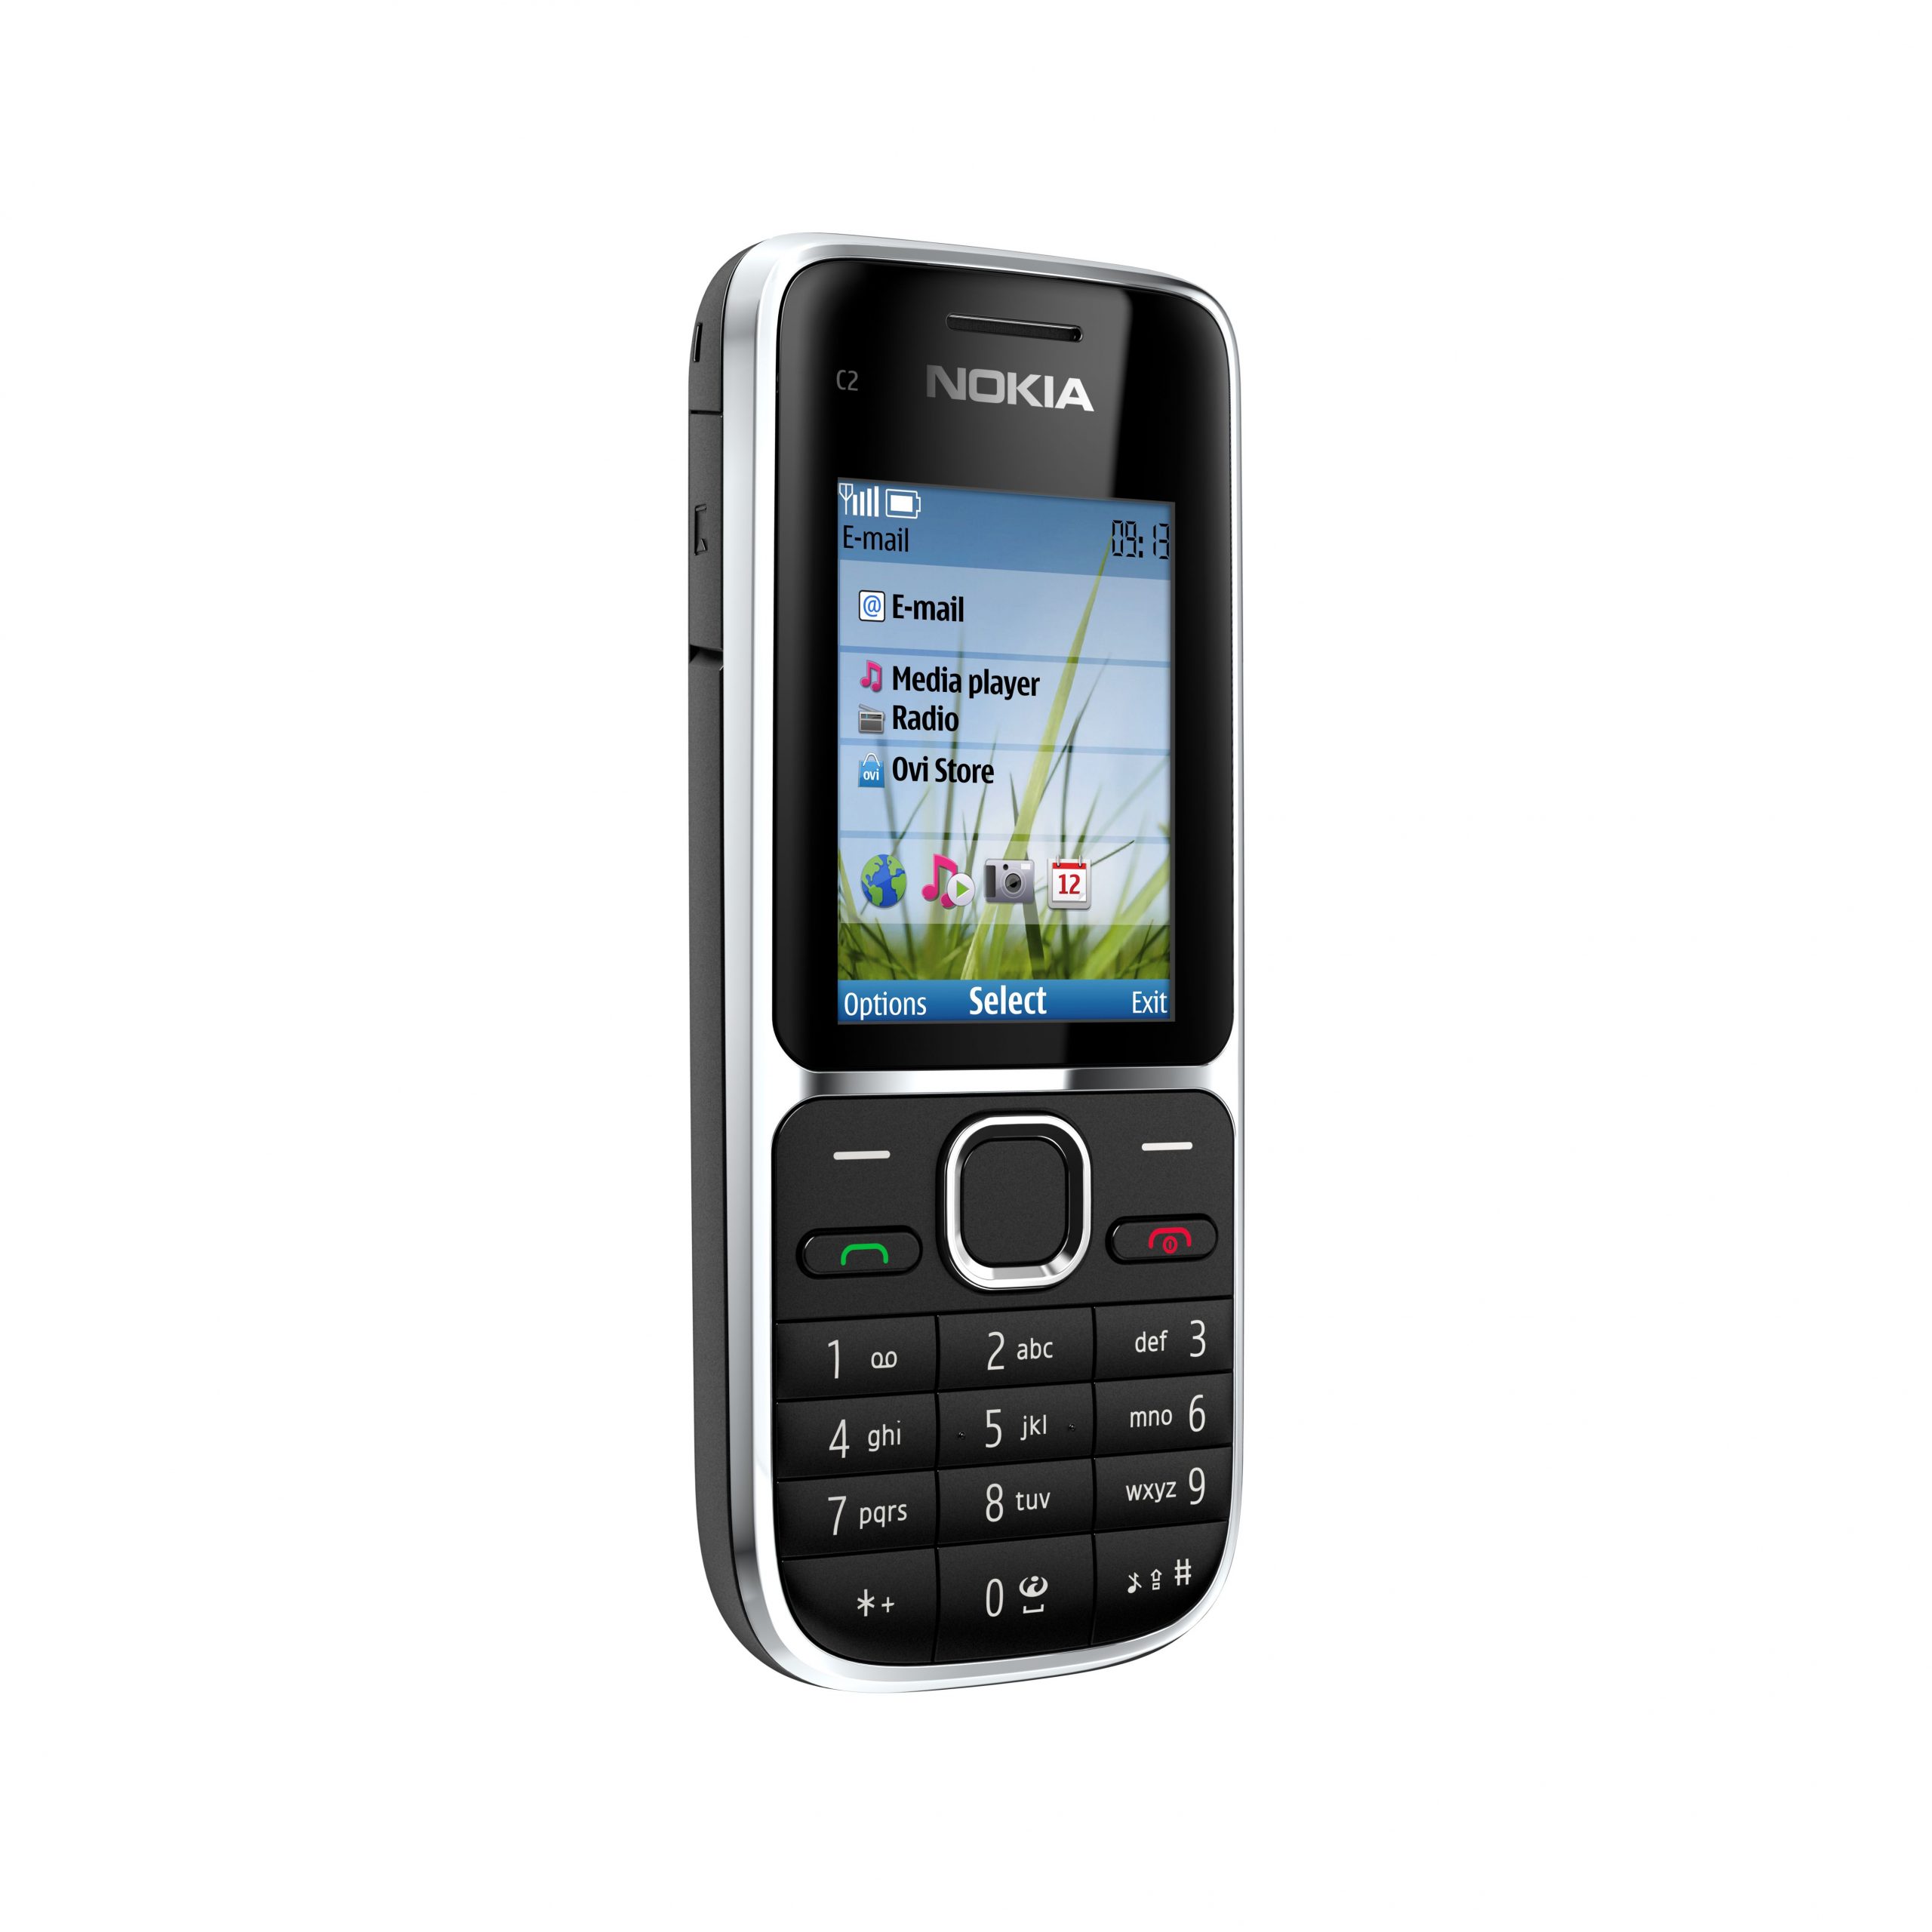 Nokia Launches Another Budget 3G Phone